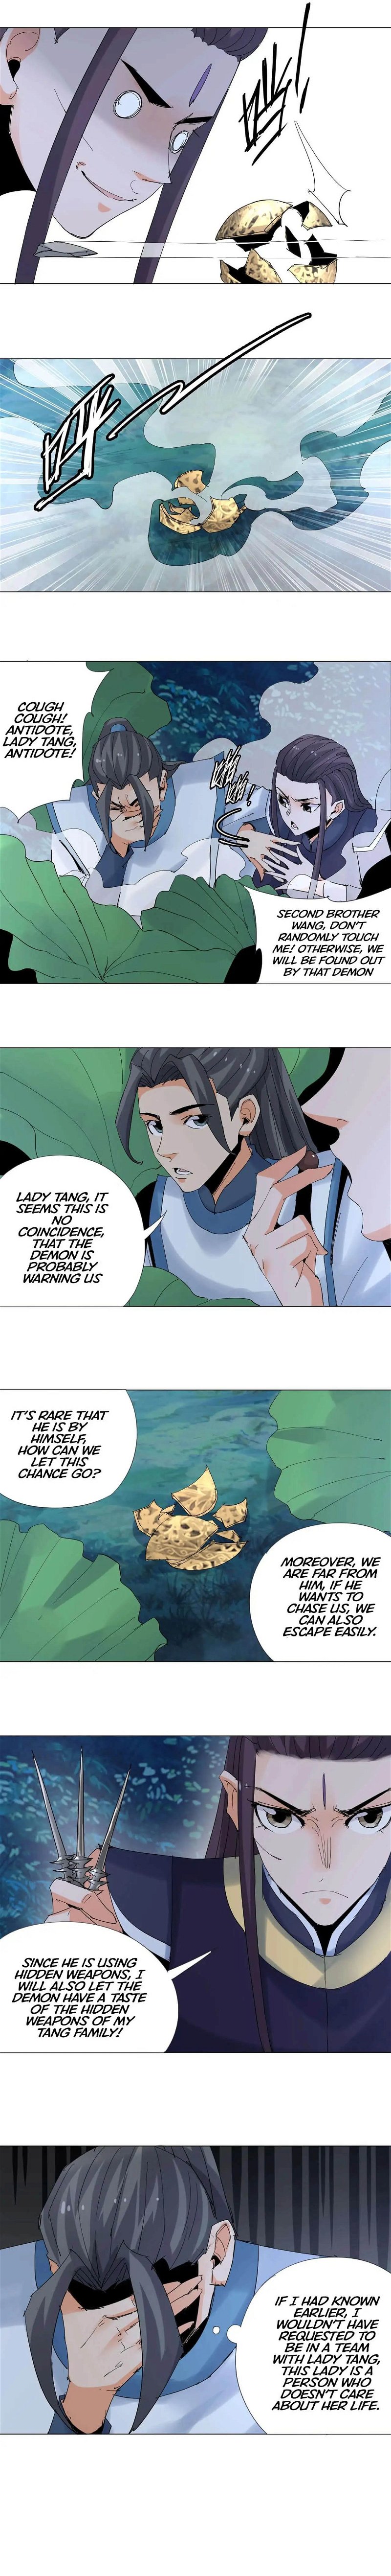 Martial arts villain Chapter 12 - Page 4